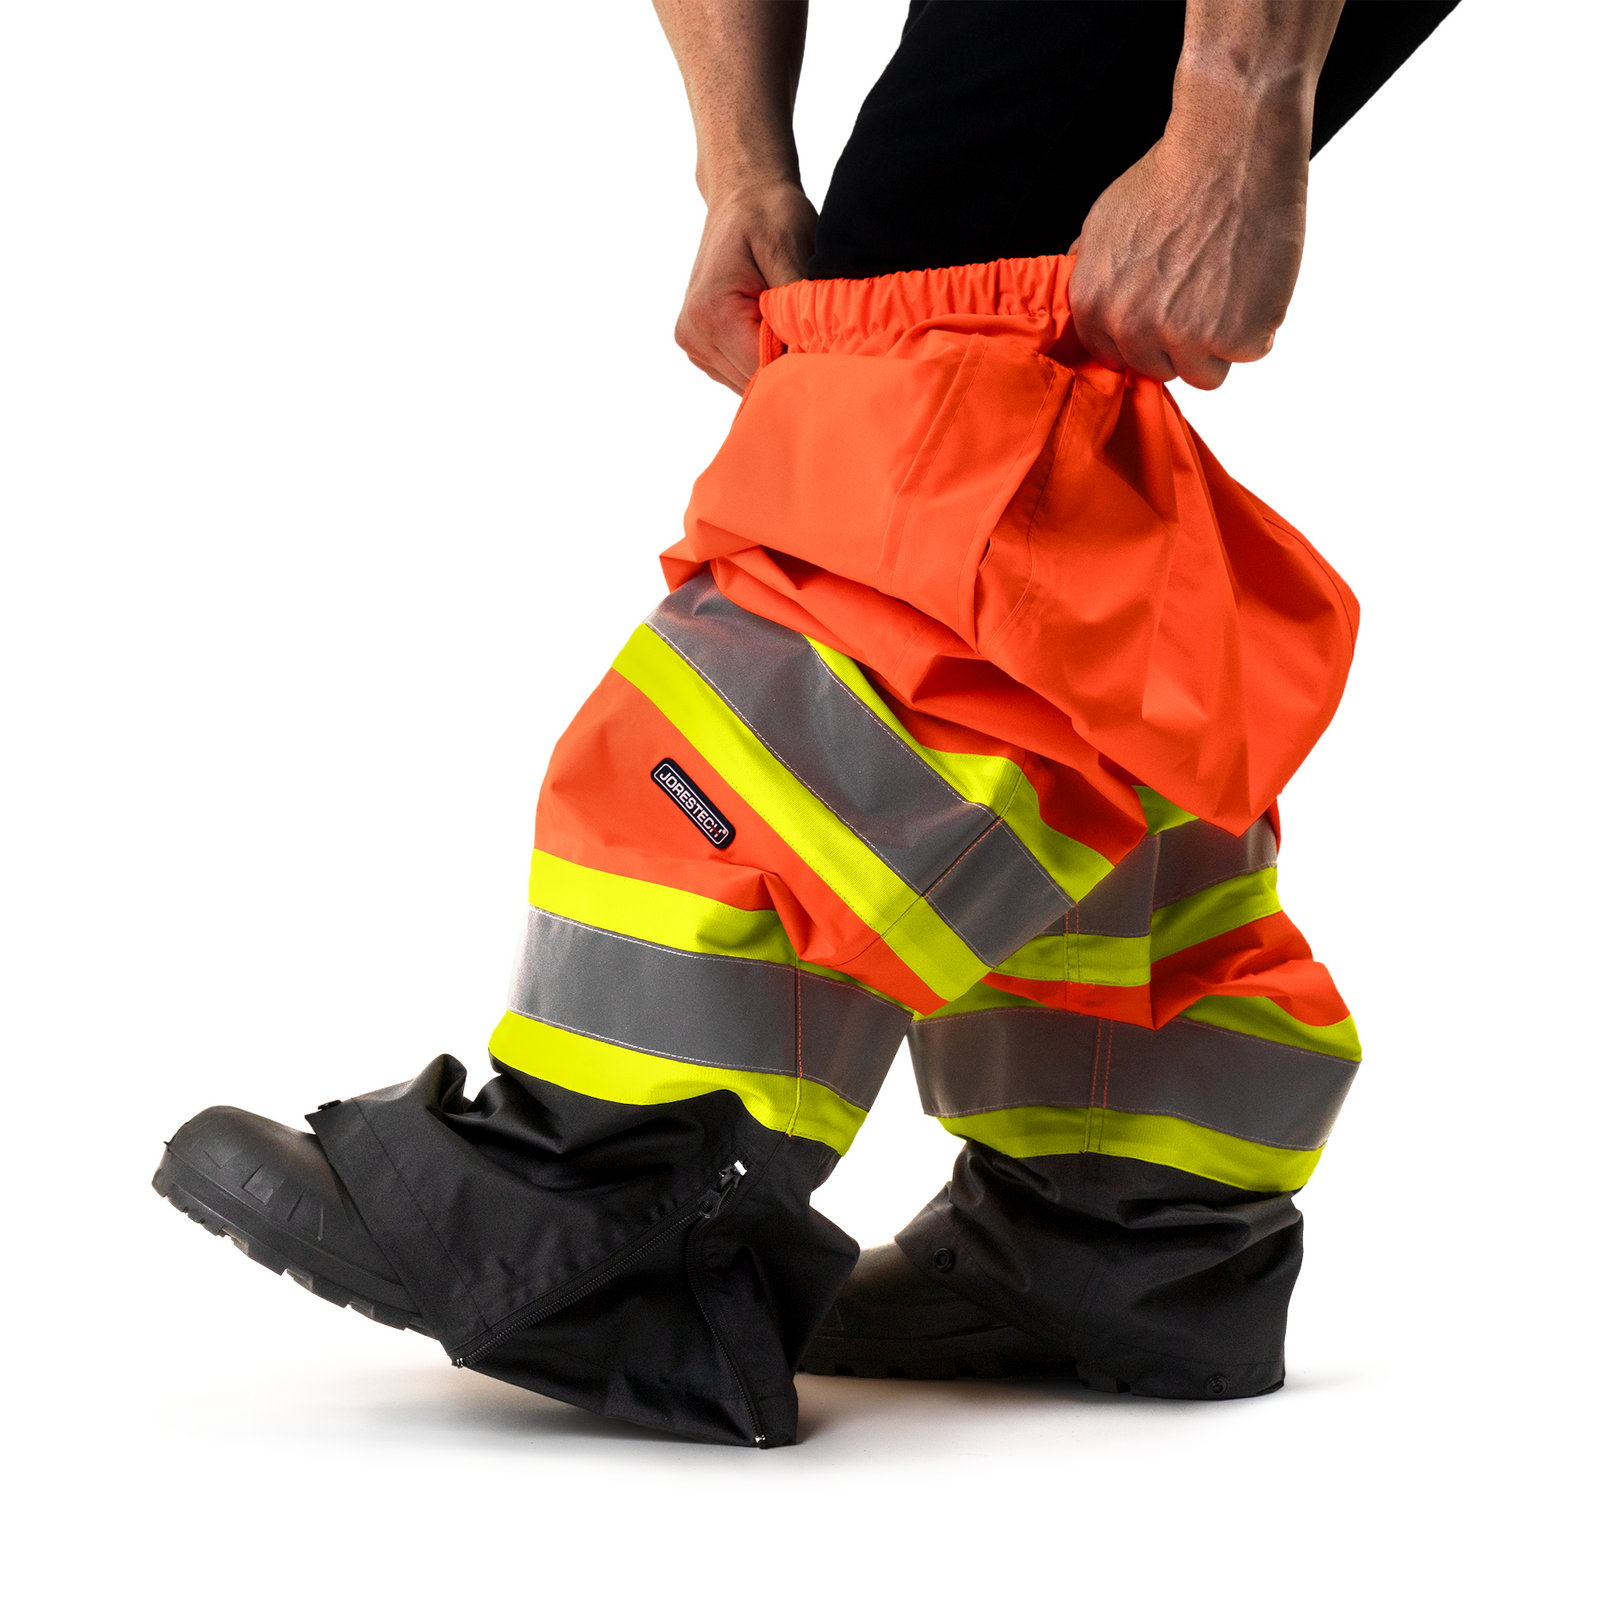 Worker wearing the High visibility safety rain pants as a rain proof protective layer on top of his clothes